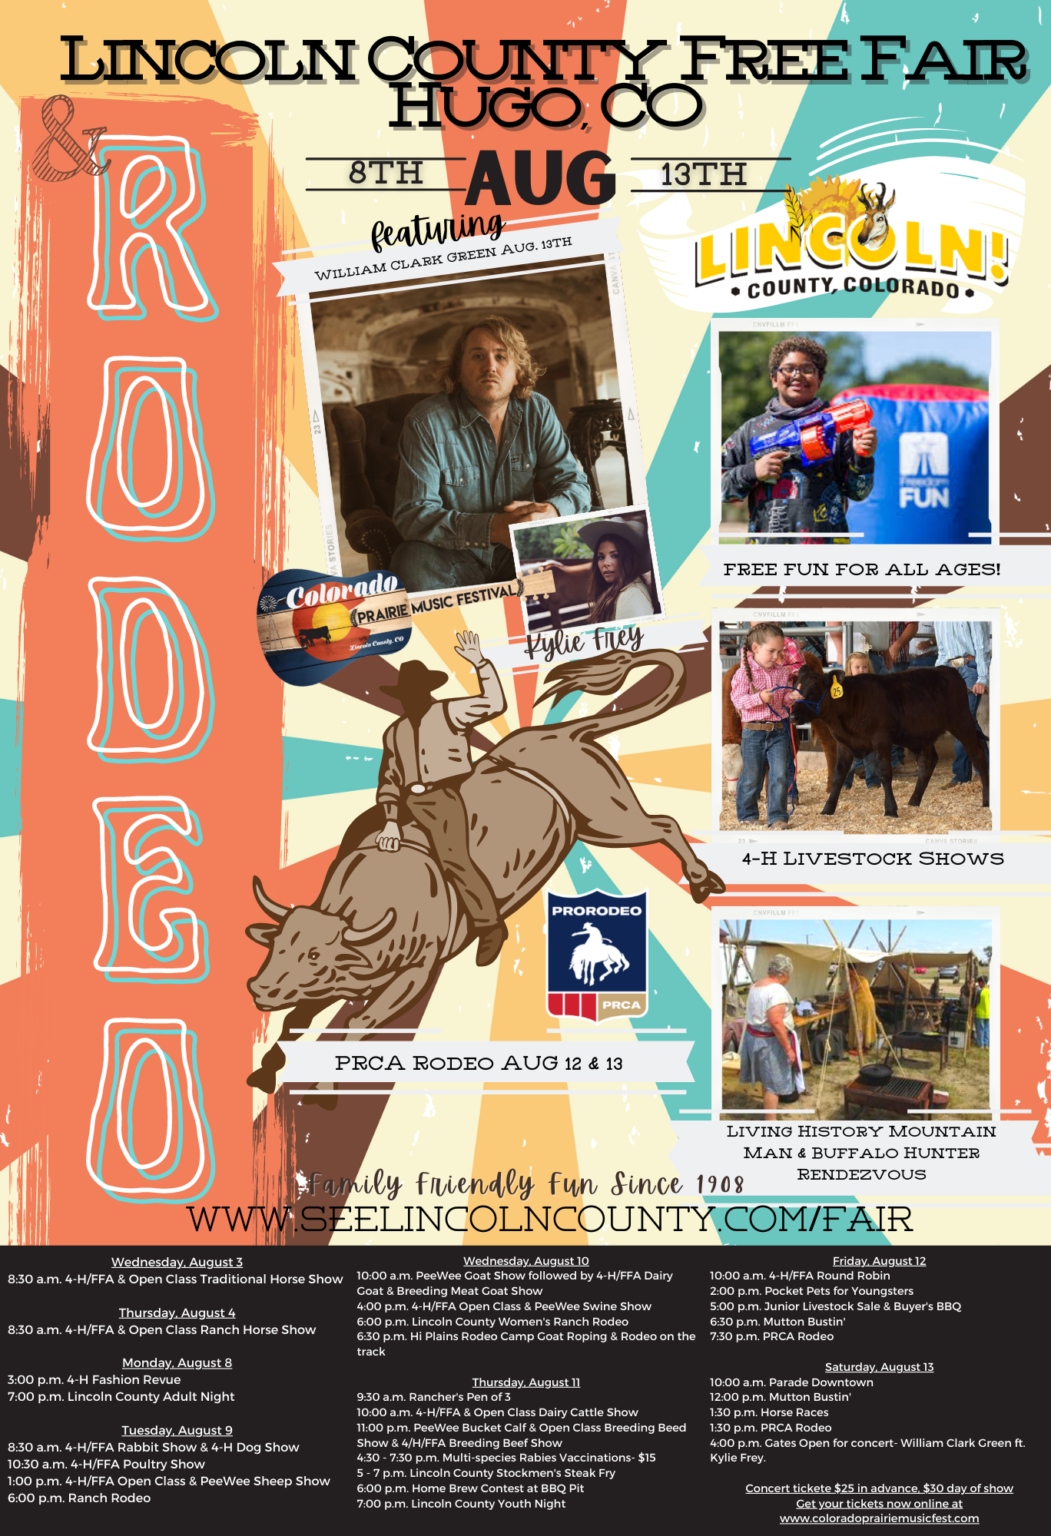 Lincoln County Fair & Rodeo - See Lincoln County Colorado